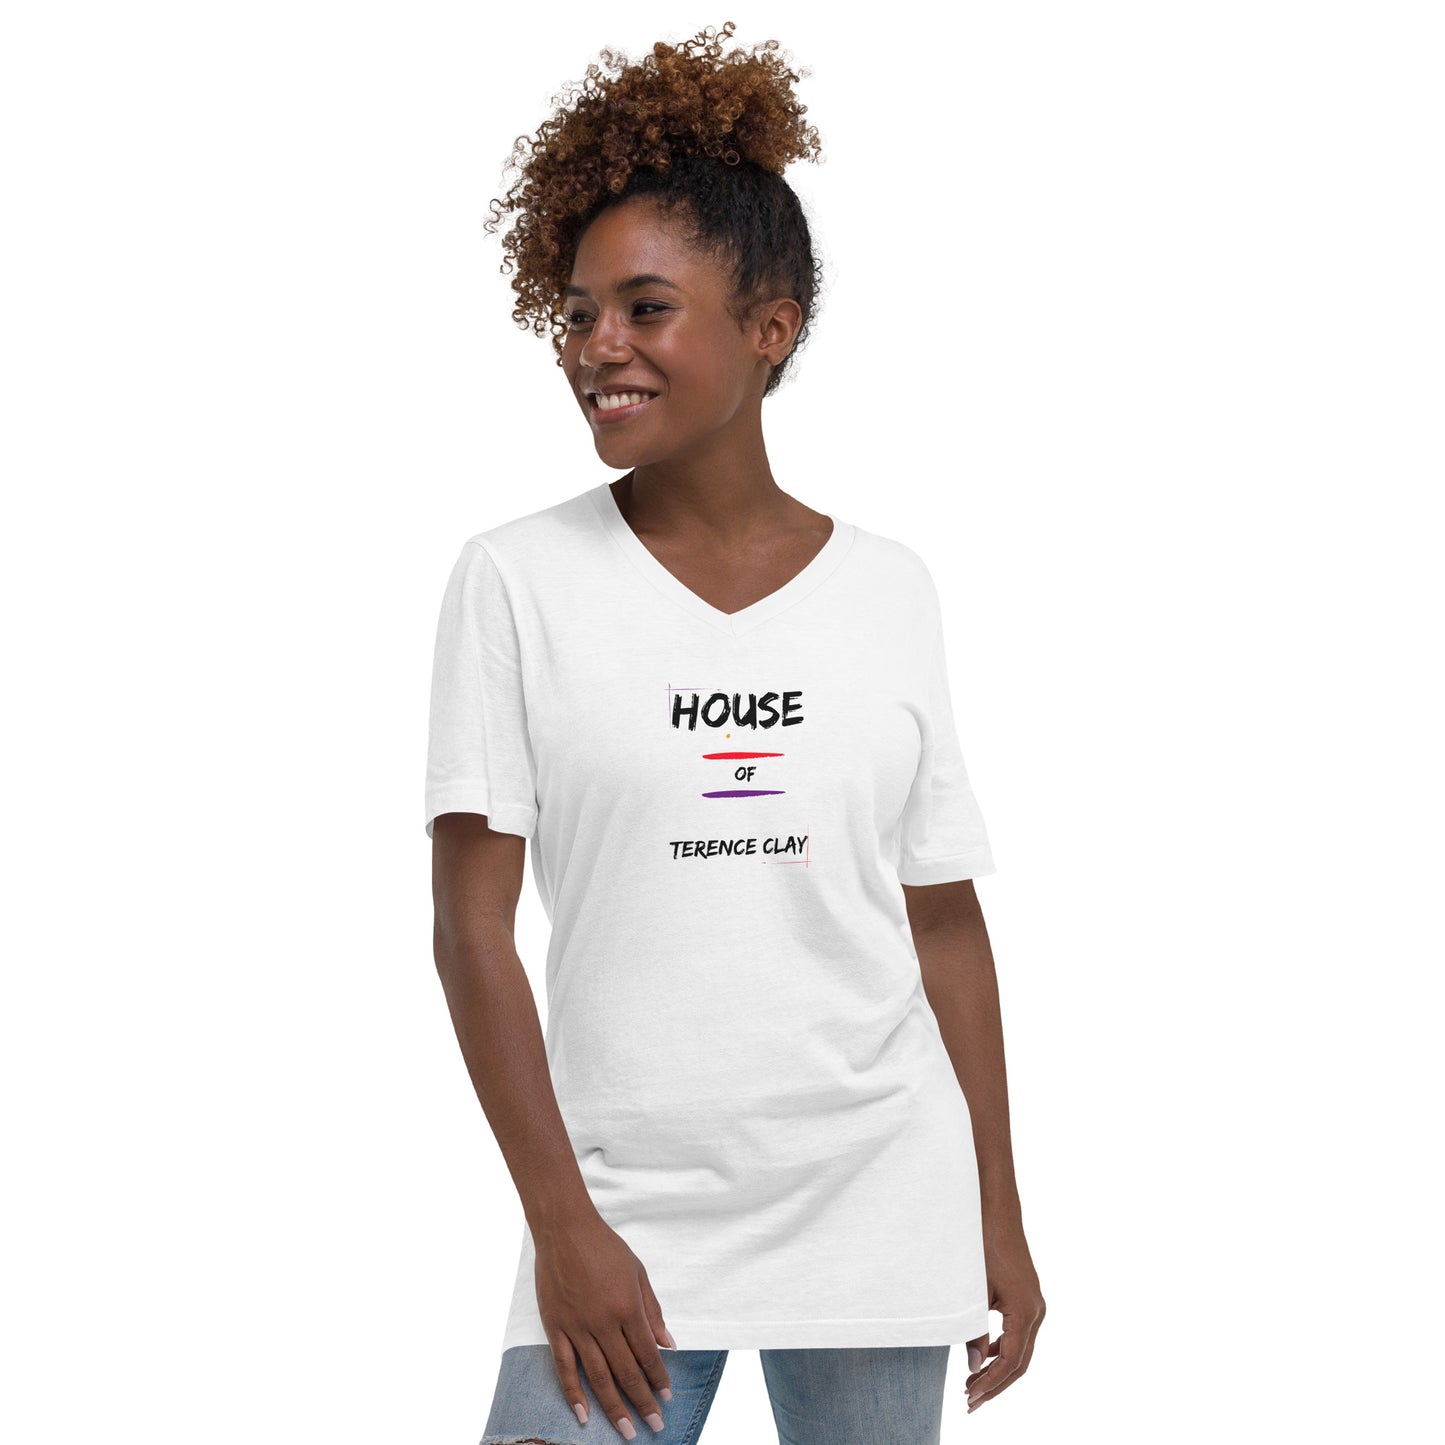 "HOUSE of Terence Clay 90's Retro-Look" V-Neck T-Shirt - White-Box on White